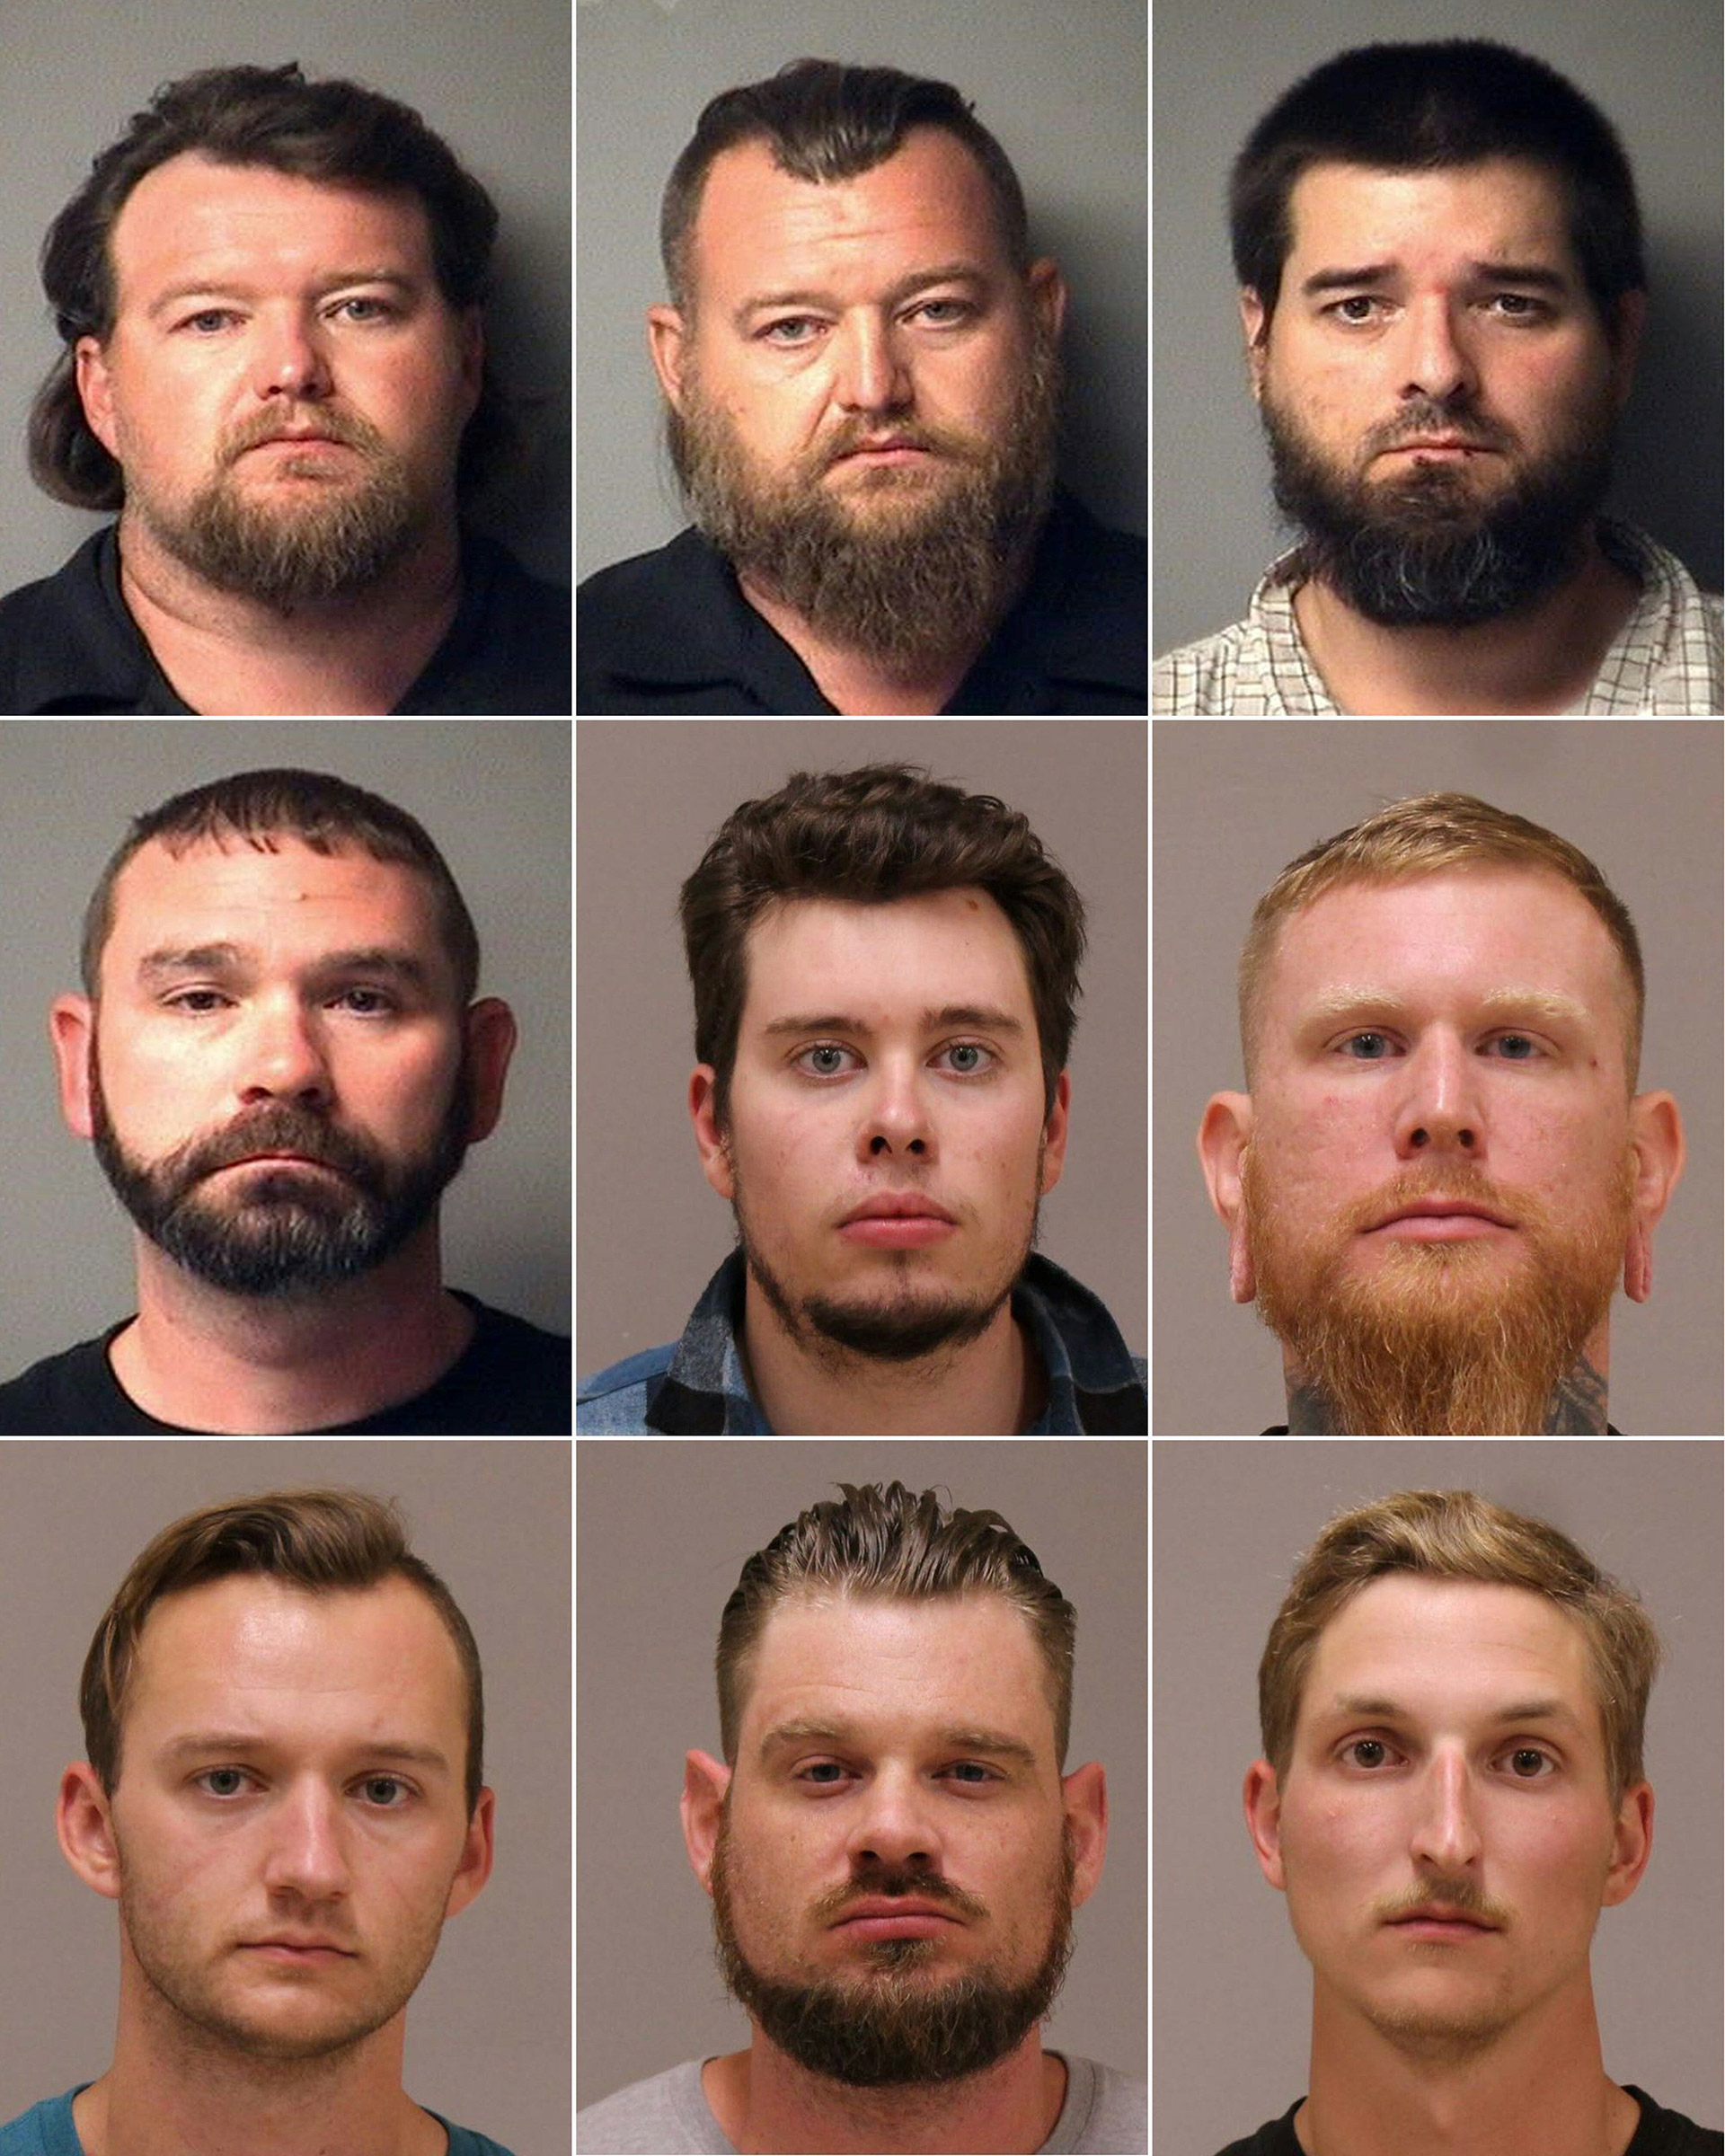 This grid of pictures shows booking photos released by the Antrim County Sheriff's Office in Michigan (L-R, top to bottom) Michael Null, William Null, Eric Molitor, and Shawn Fix and images released by the Kent County Sheriff's Office in Michigan, Ty Garbin, Brandon Caserta, Kaleb Franks, Adam Fox, and Daniel Harris. All are suspects have been arrested for plotting to kidnap Michigan Governor Gretchen Whitmer and 